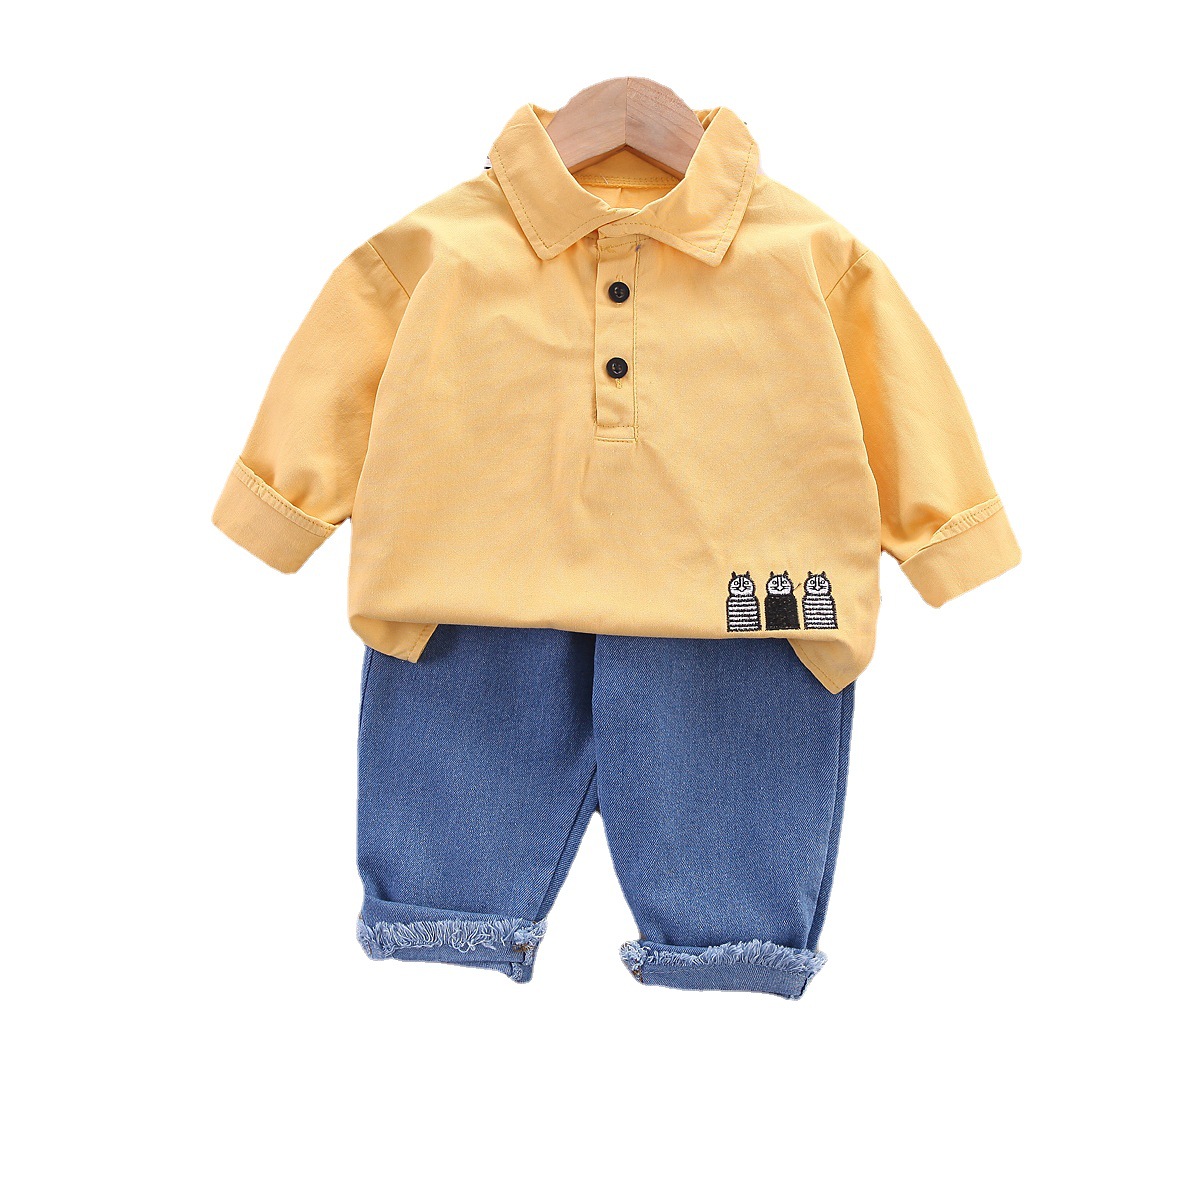 Long Sleeve Children's Solid Color Casual Shirt Kids Clothes Two-Piece Suit 0-5 Years Old Children Children's Suit Wholesale Boys Spring Clothing